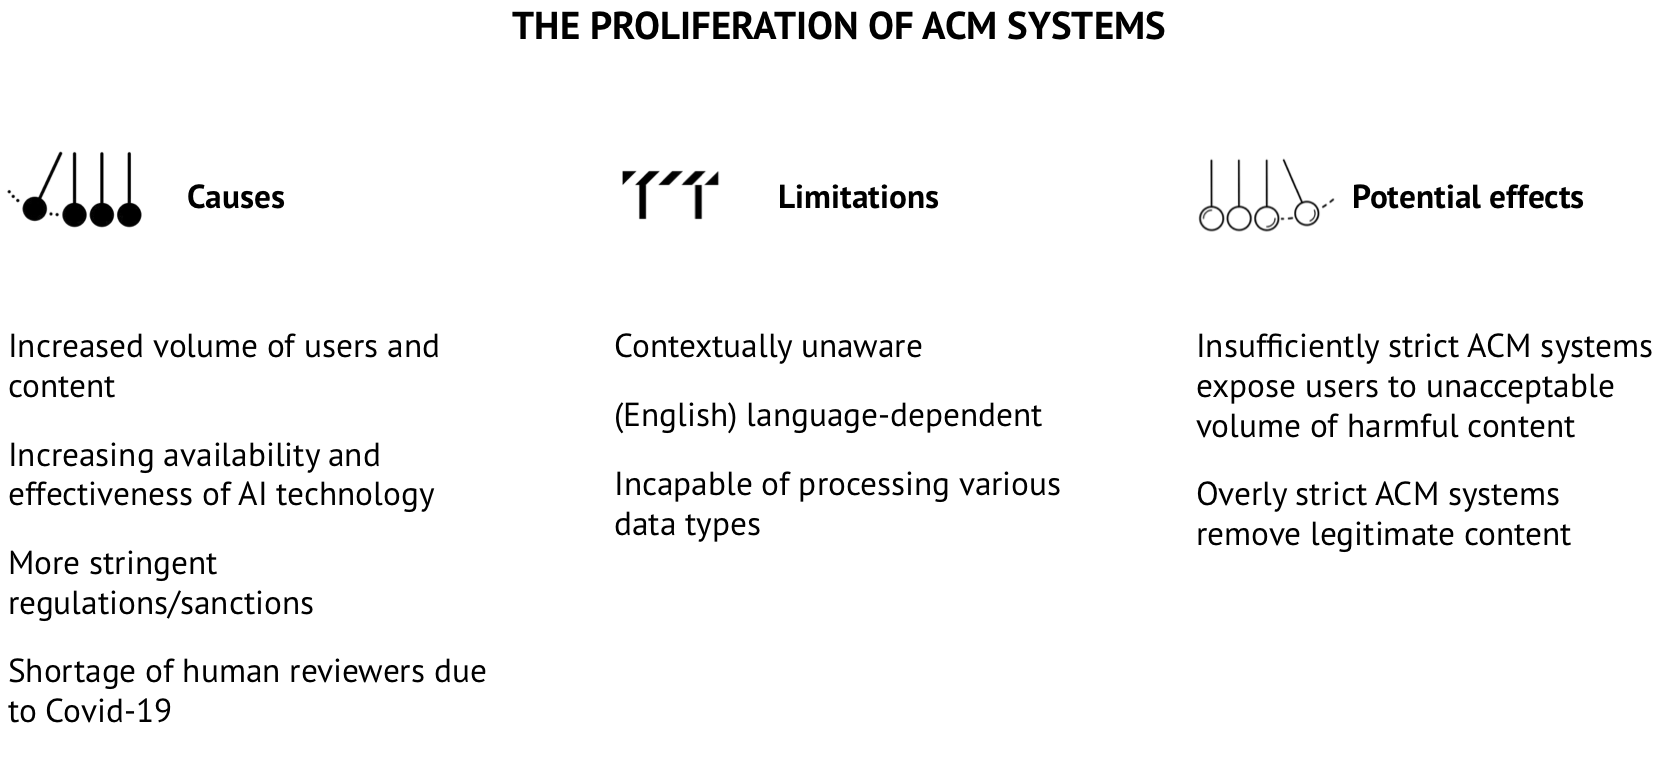 verview visualising the causes, limitations and potential effects of ACM systems